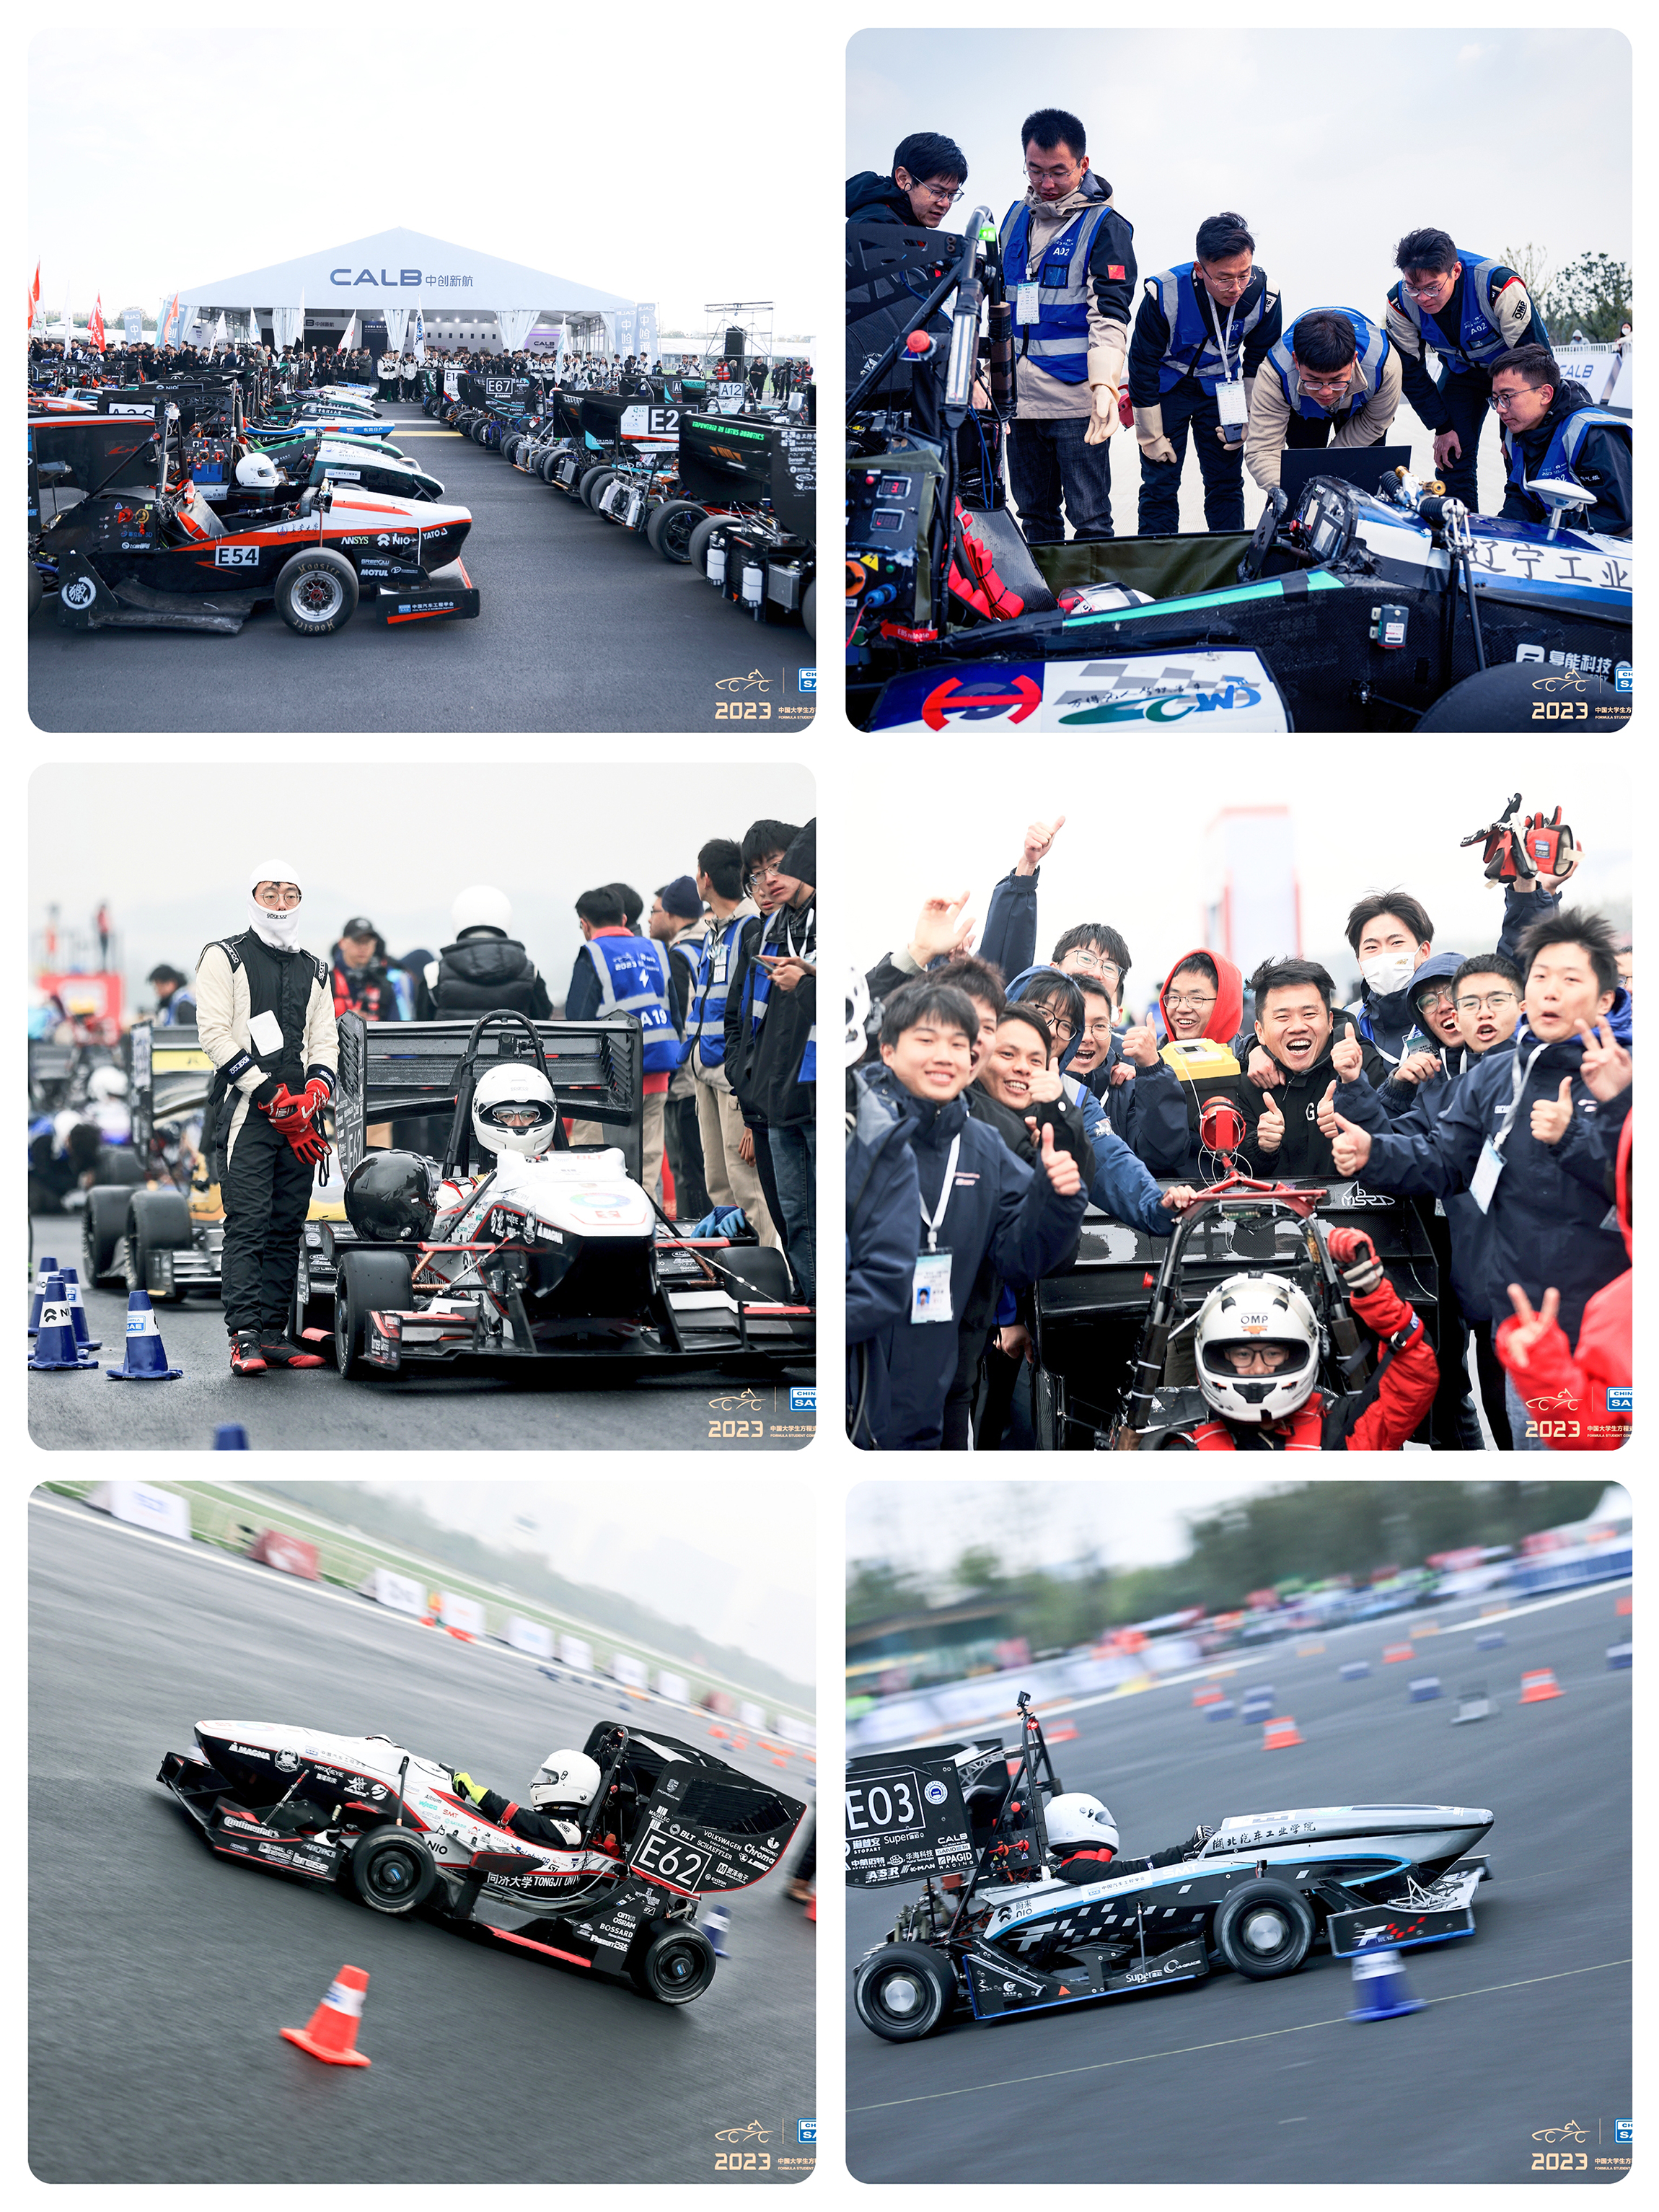 CALB Empowers Youth Innovation | Strategic Sponsorship of the 2023 China Formula Student Electric Competition in China